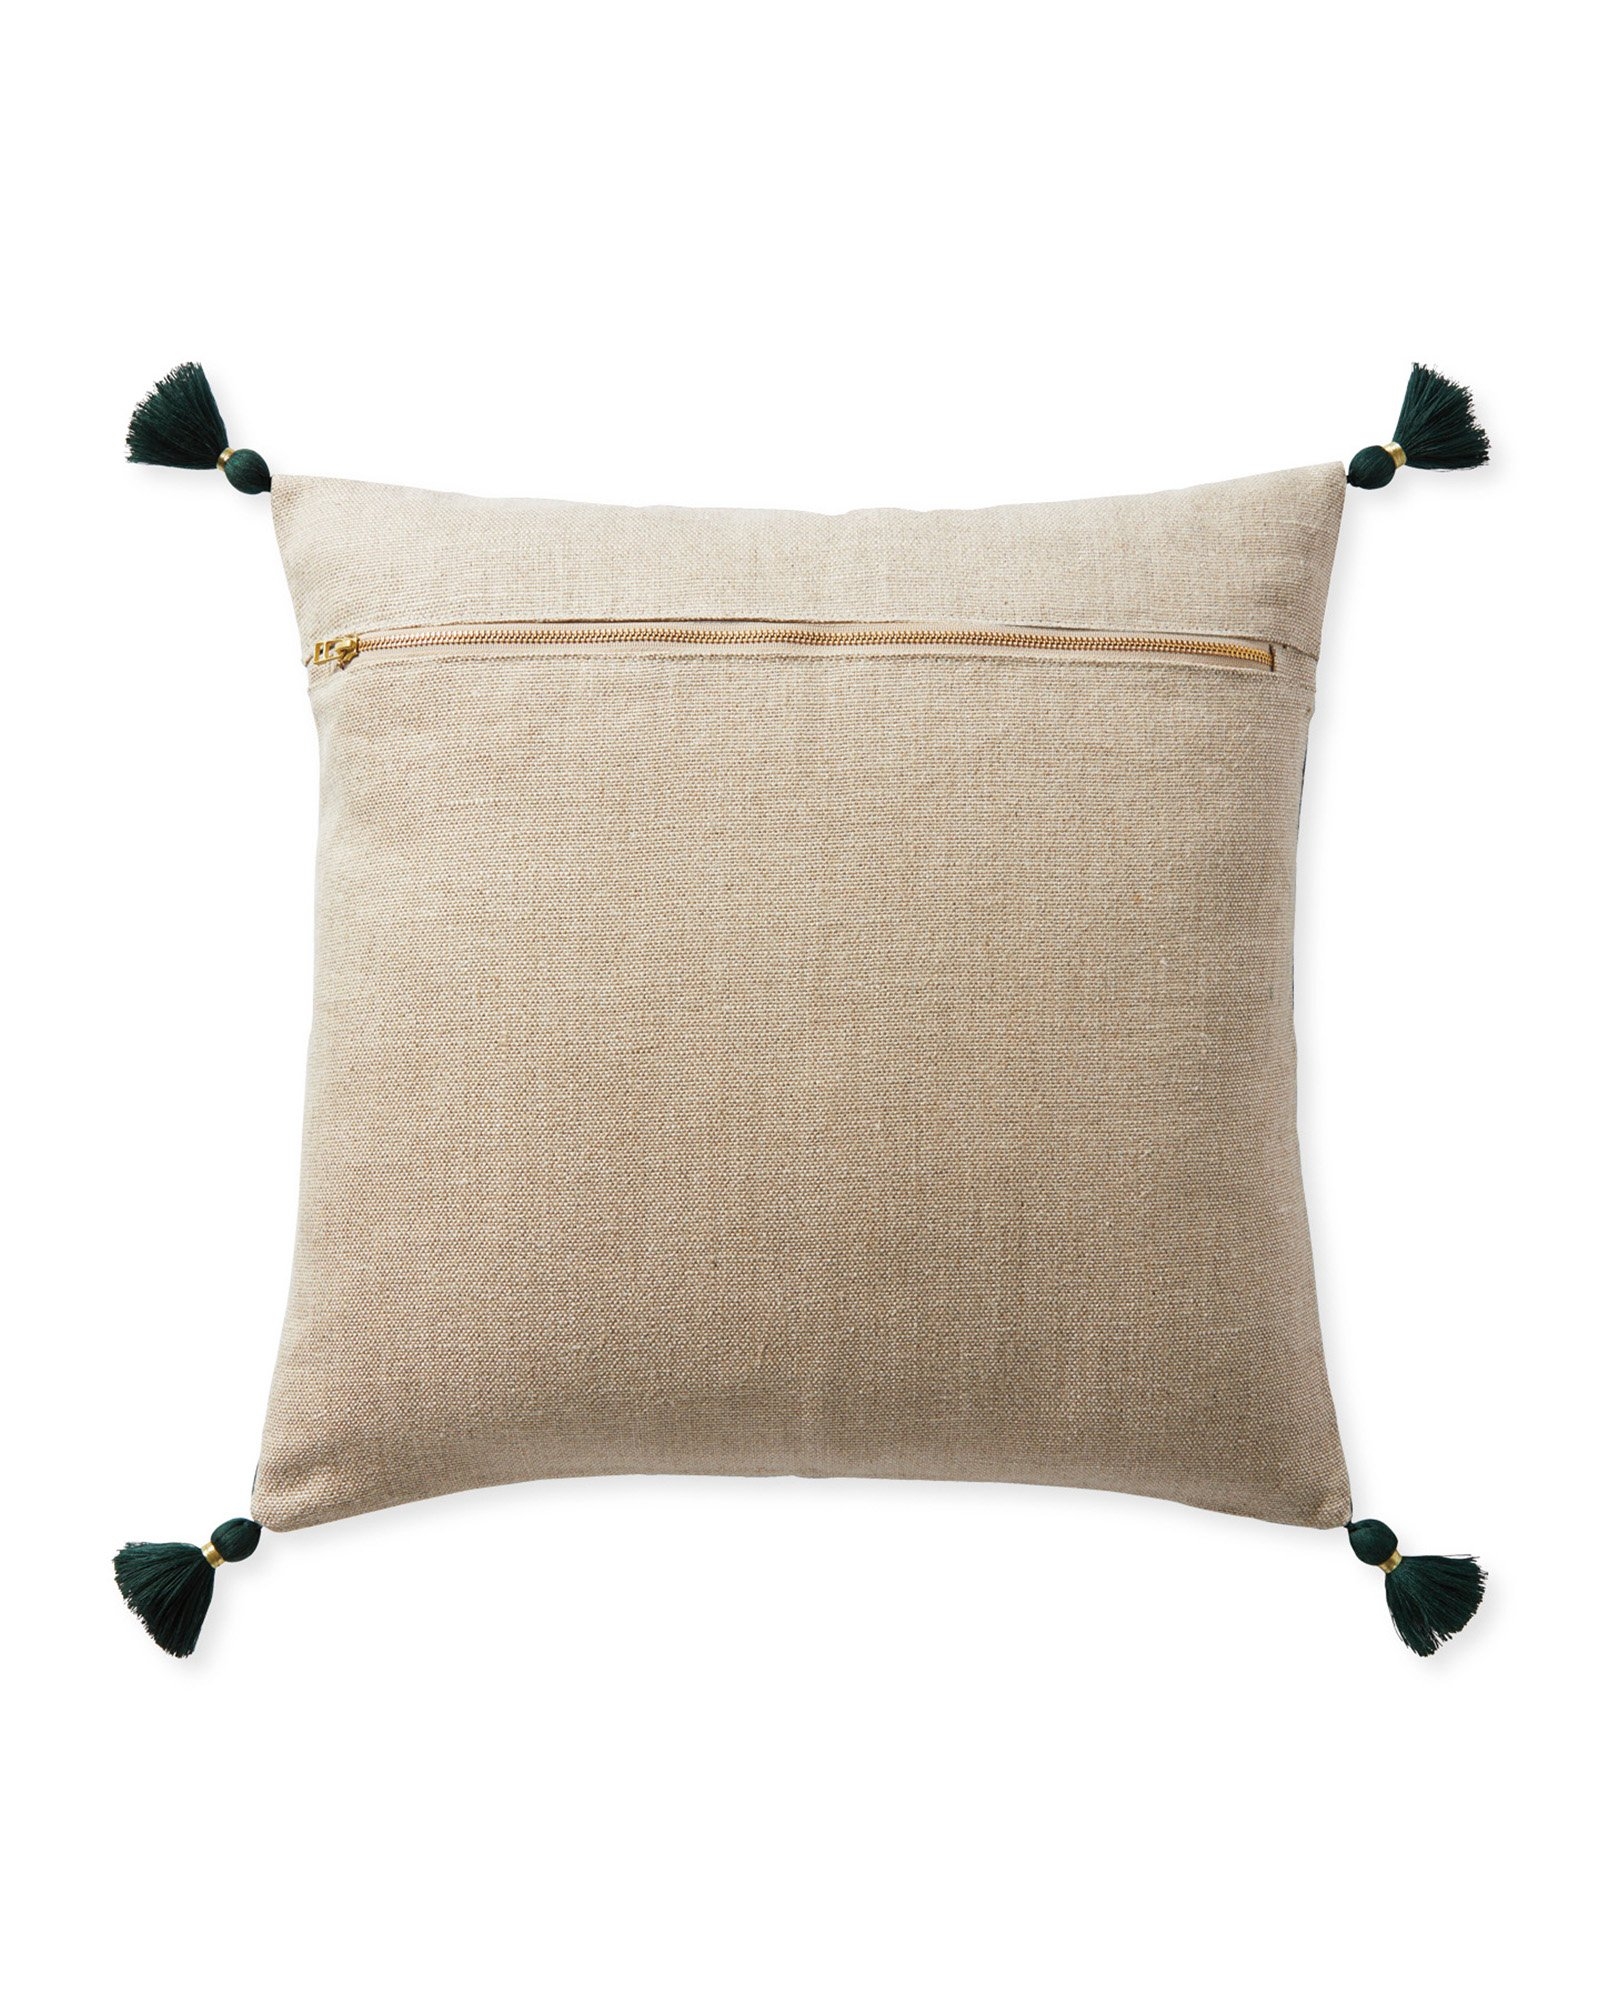 Suede Eva 20" SQ Pillow Cover - Evergreen - Insert sold separately - Image 2